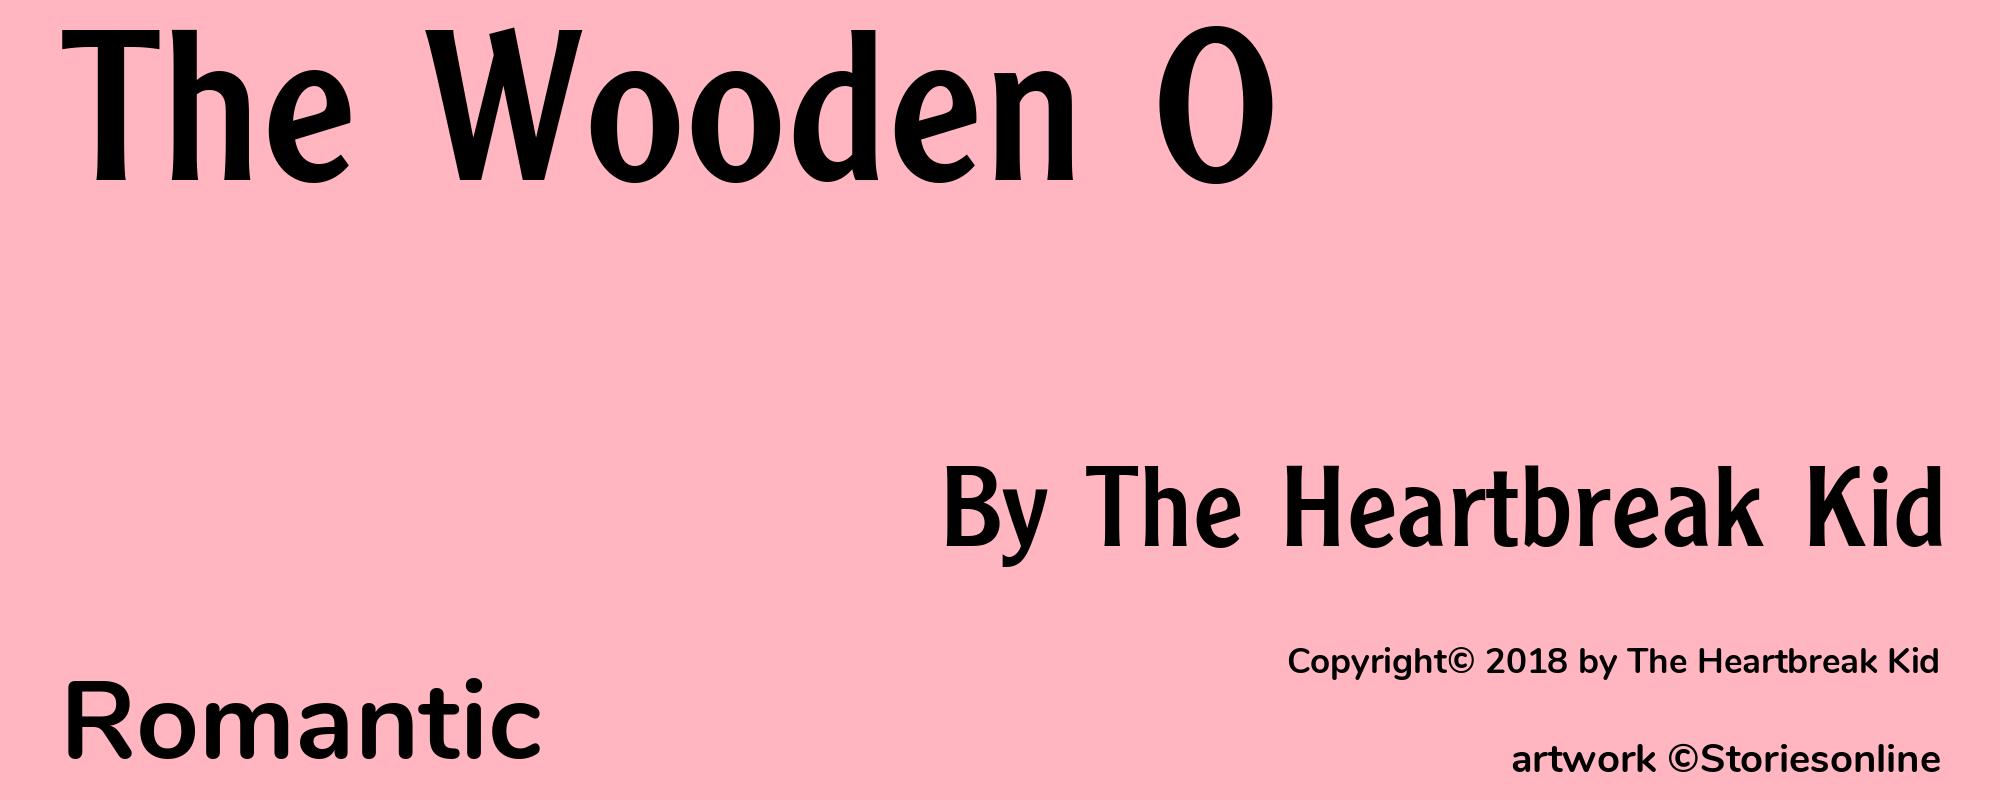 The Wooden O - Cover